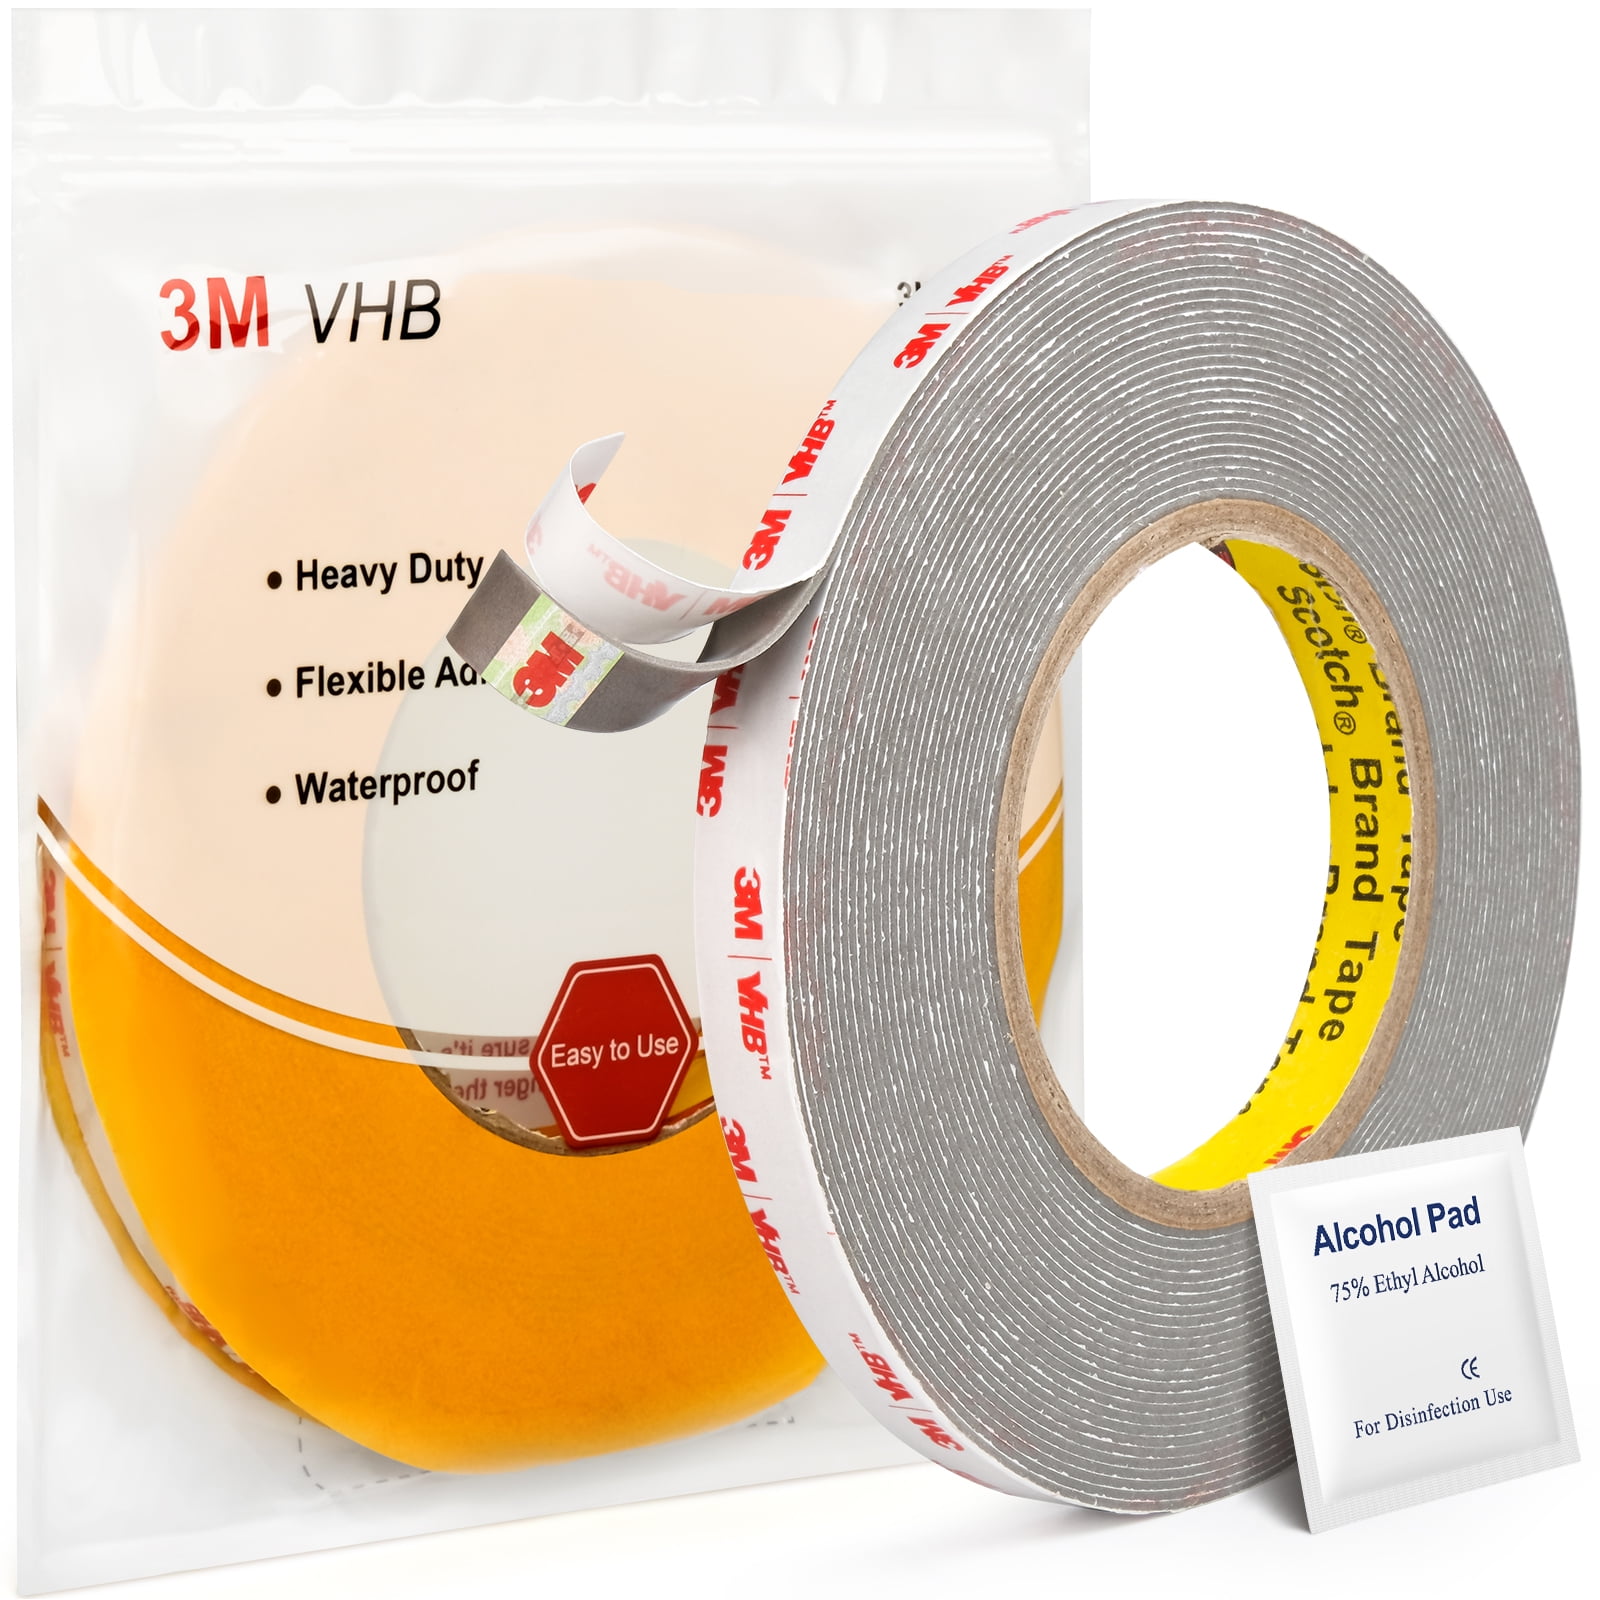 Strong Sticky Adhesive Mounting Tape Gel Poster Tape Traceless Removable Washable Nano Gel Grip Tape for Fix Carpet Mats,Paste Items Office Home Decor 20FT/2Pack 10FT Double Sided Tape Heavy Duty, 